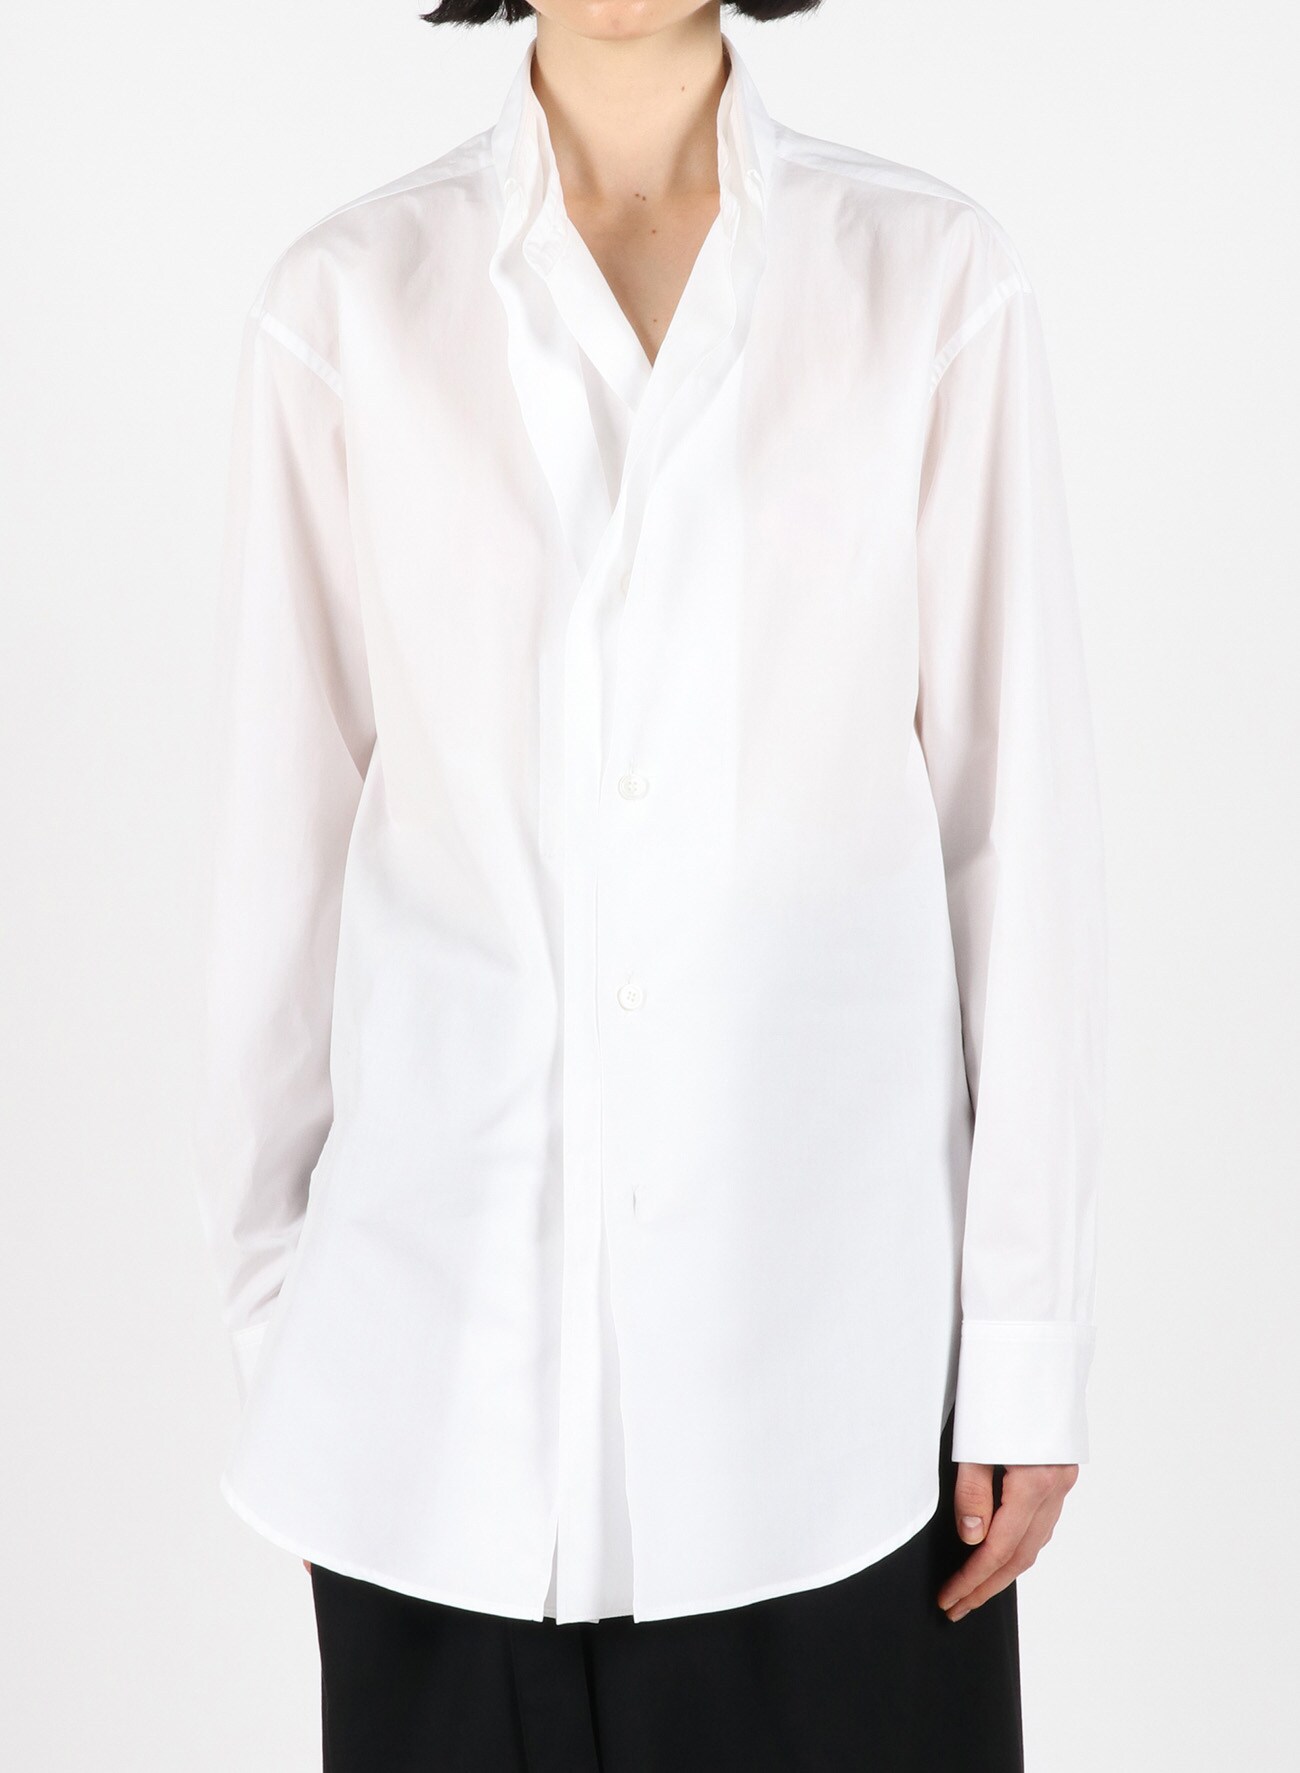 100/2 BROAD DOUBLE FRONT SHIRT